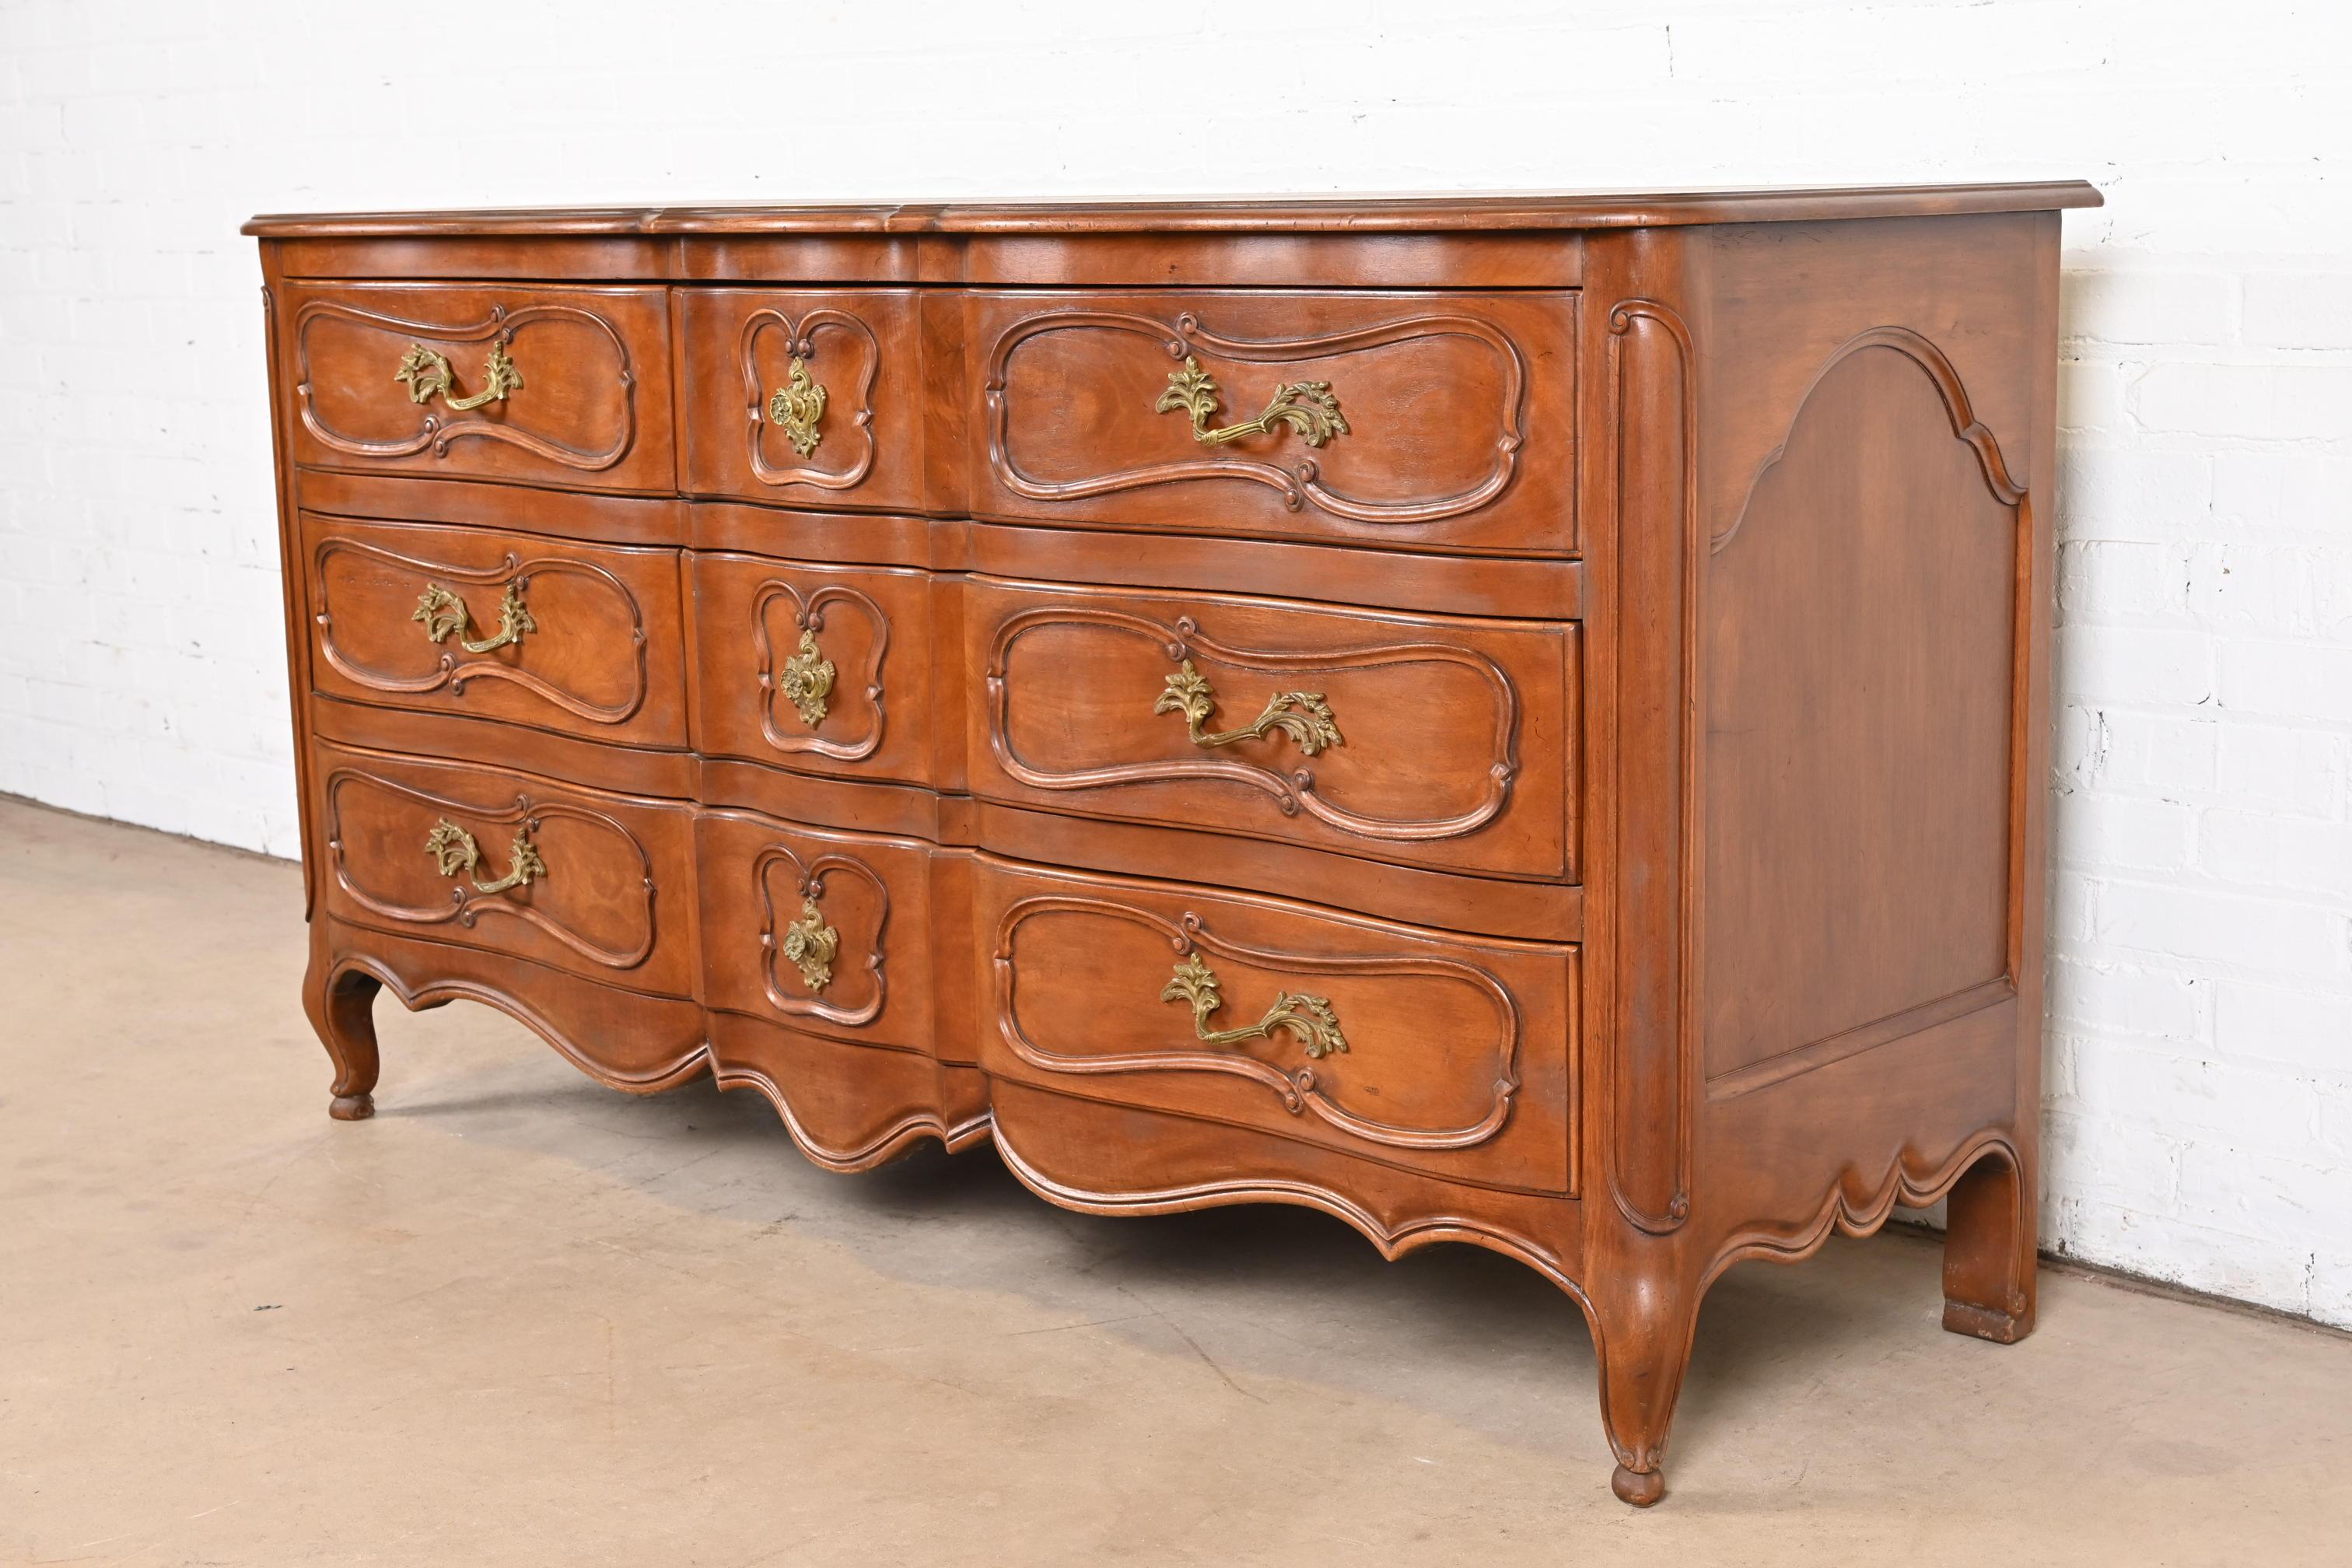 Bodart French Provincial Louis XV Fruitwood Triple Dresser, Circa 1960s In Good Condition For Sale In South Bend, IN